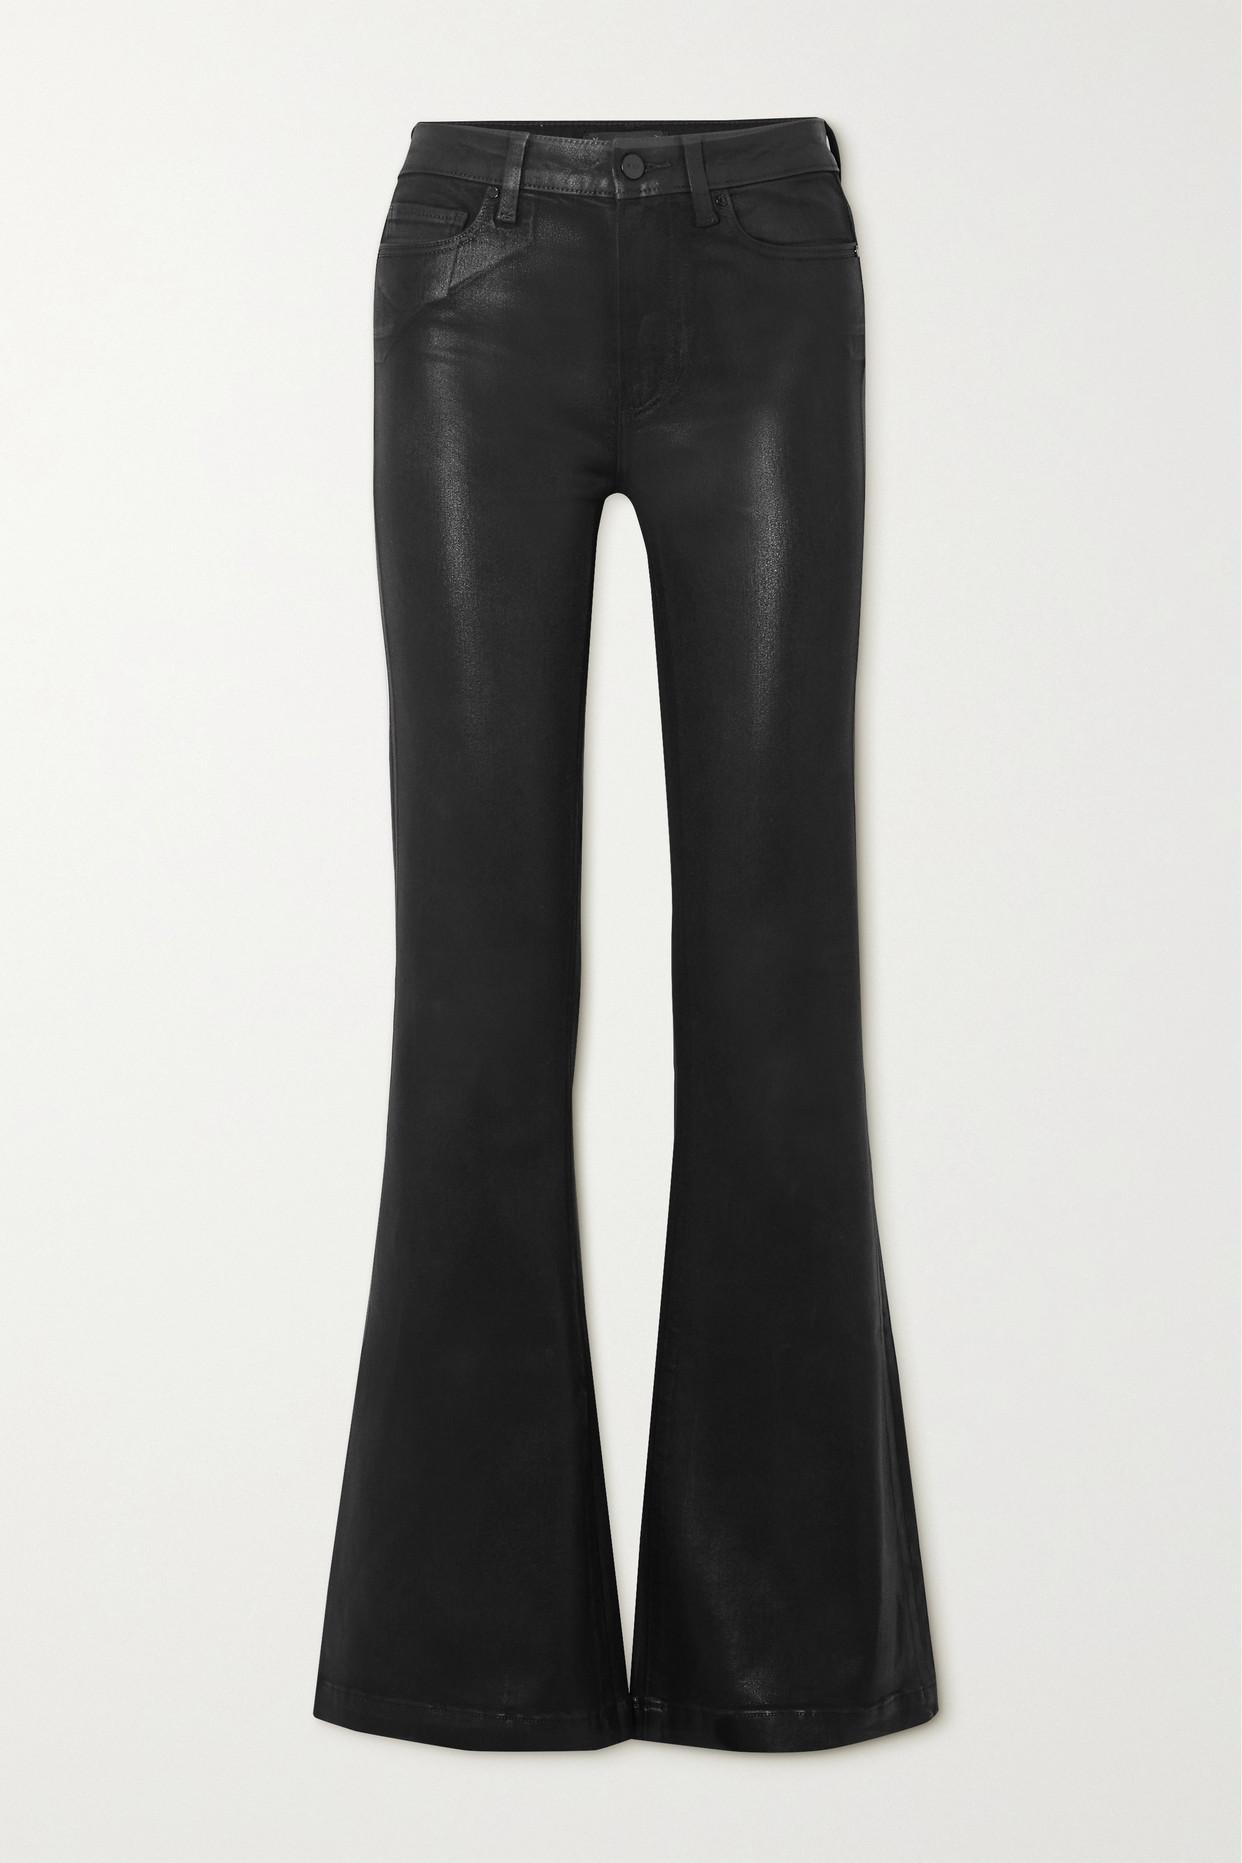 PAIGE Genevieve High-rise Coated Flared Jeans in Black | Lyst